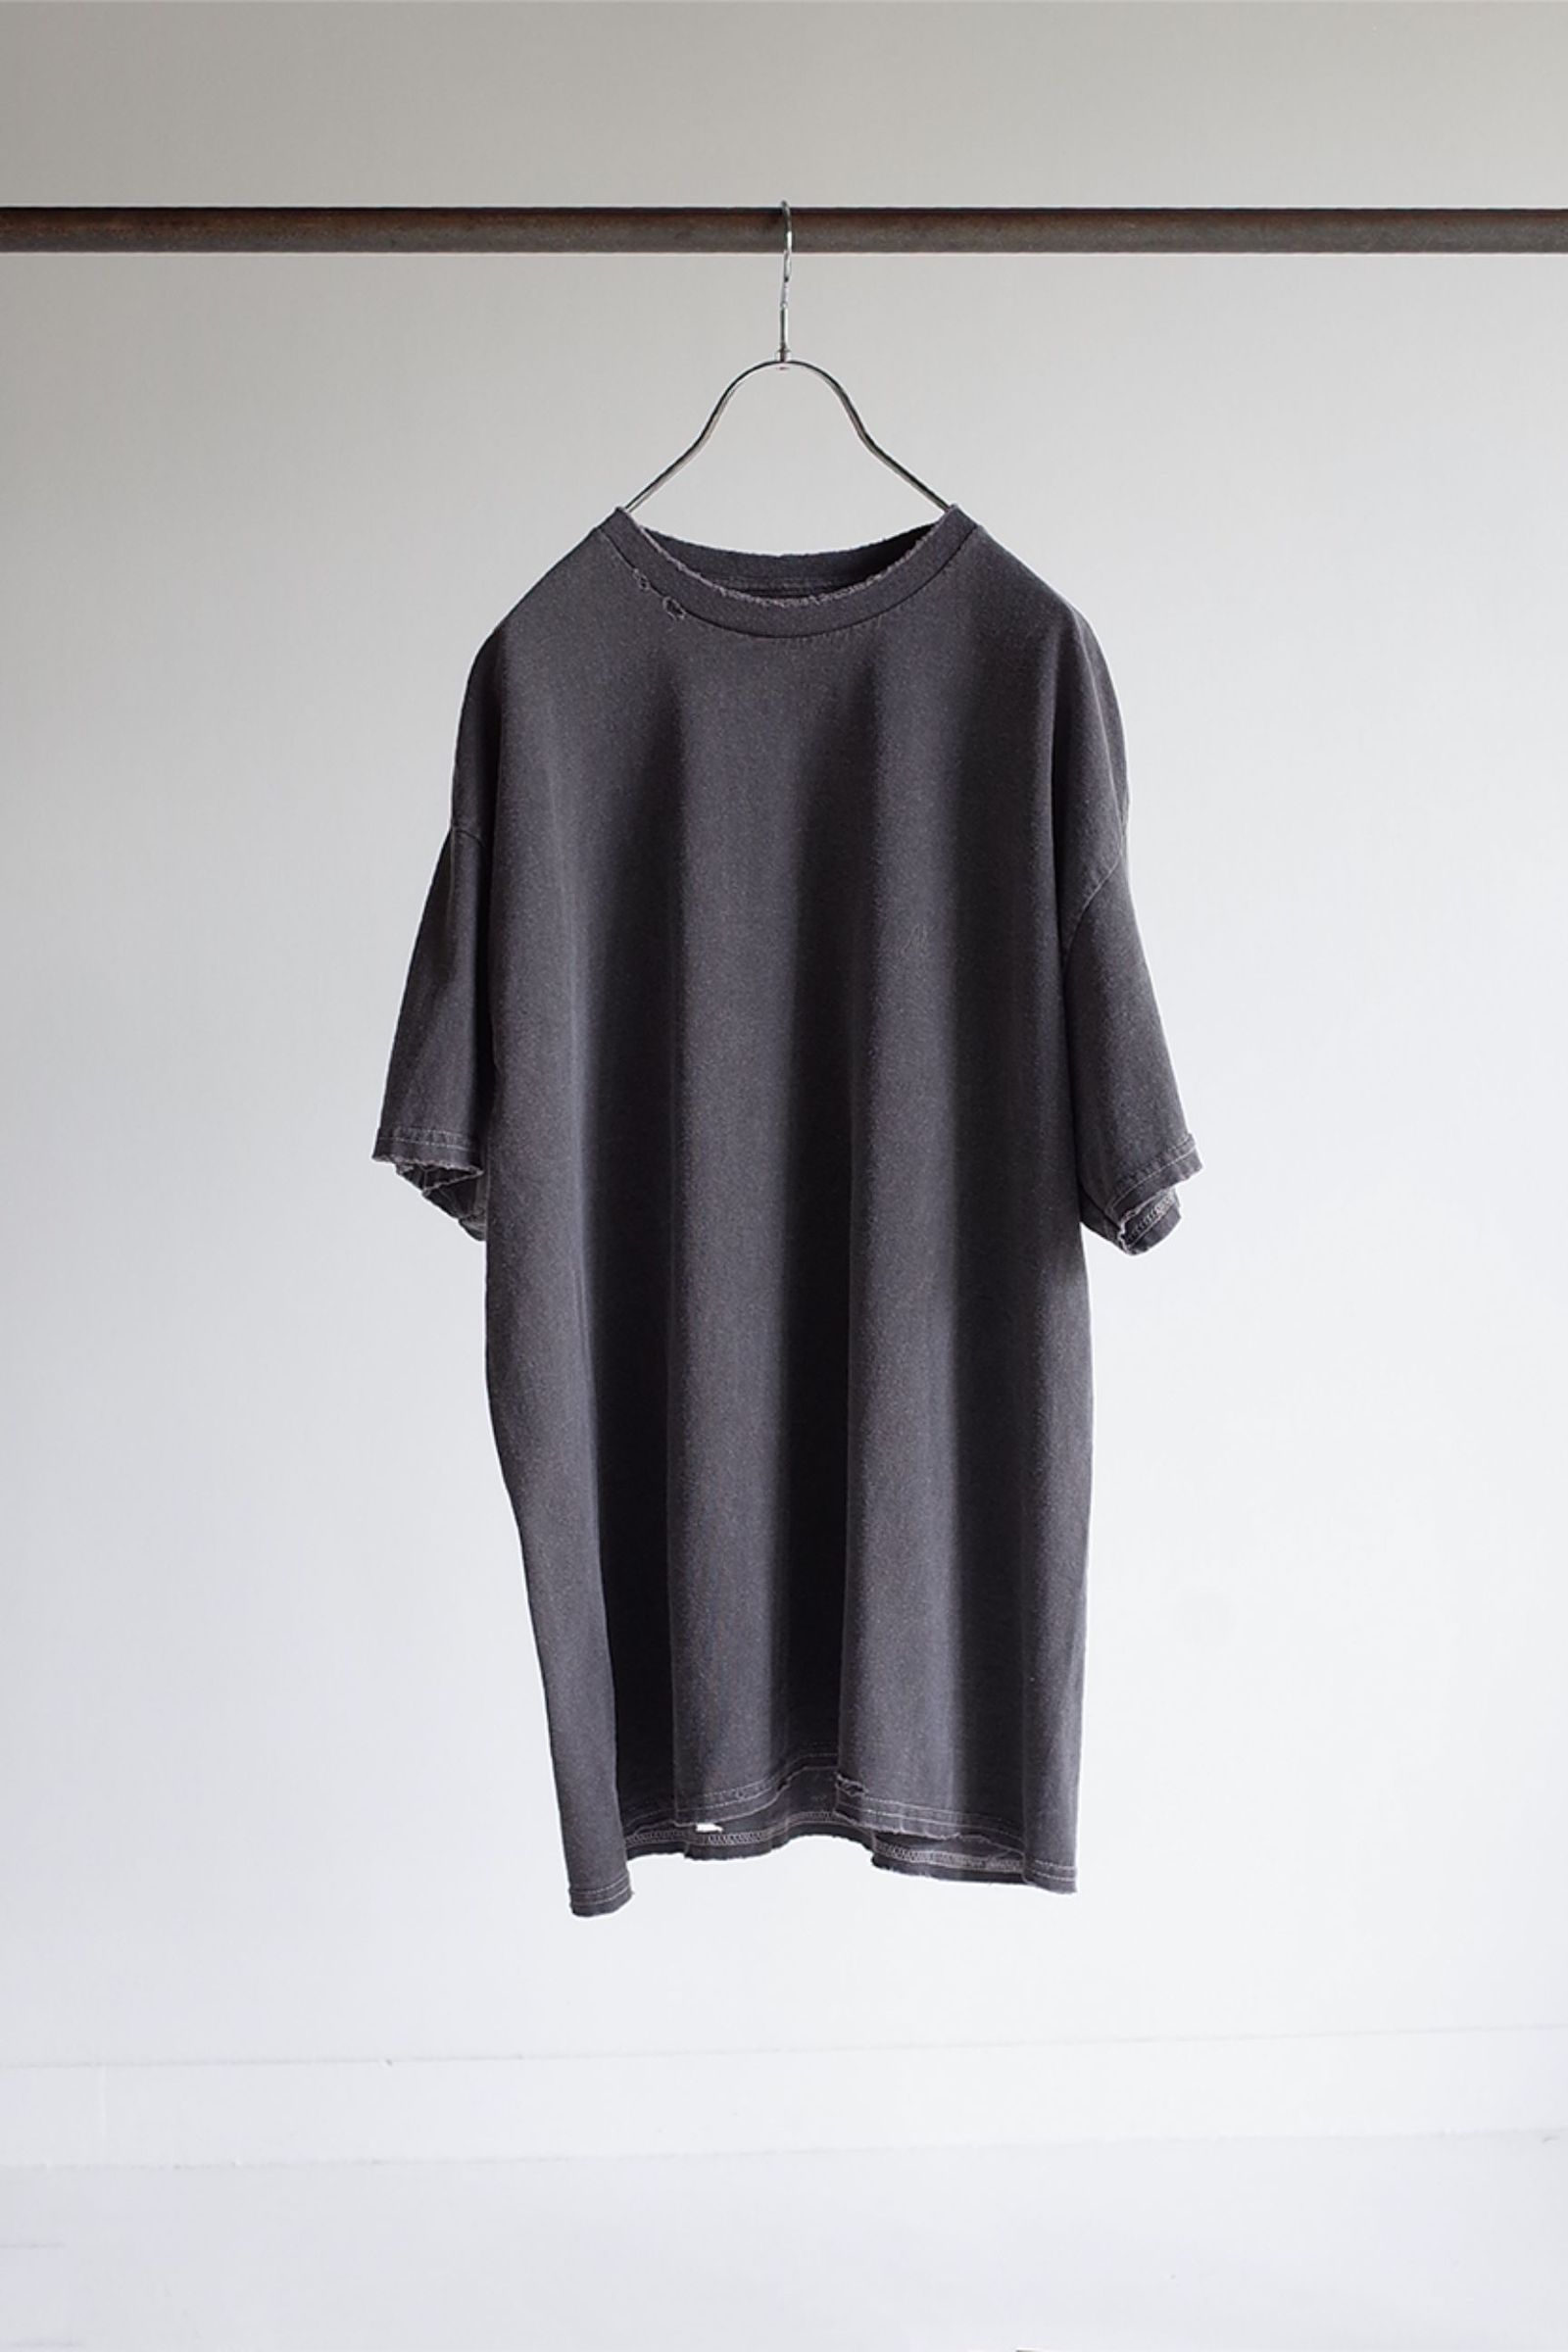 ANCELLM - 【再入荷】EMBROIDERY DYED T-SHIRT/DUSKY PURPLE | NapsNote